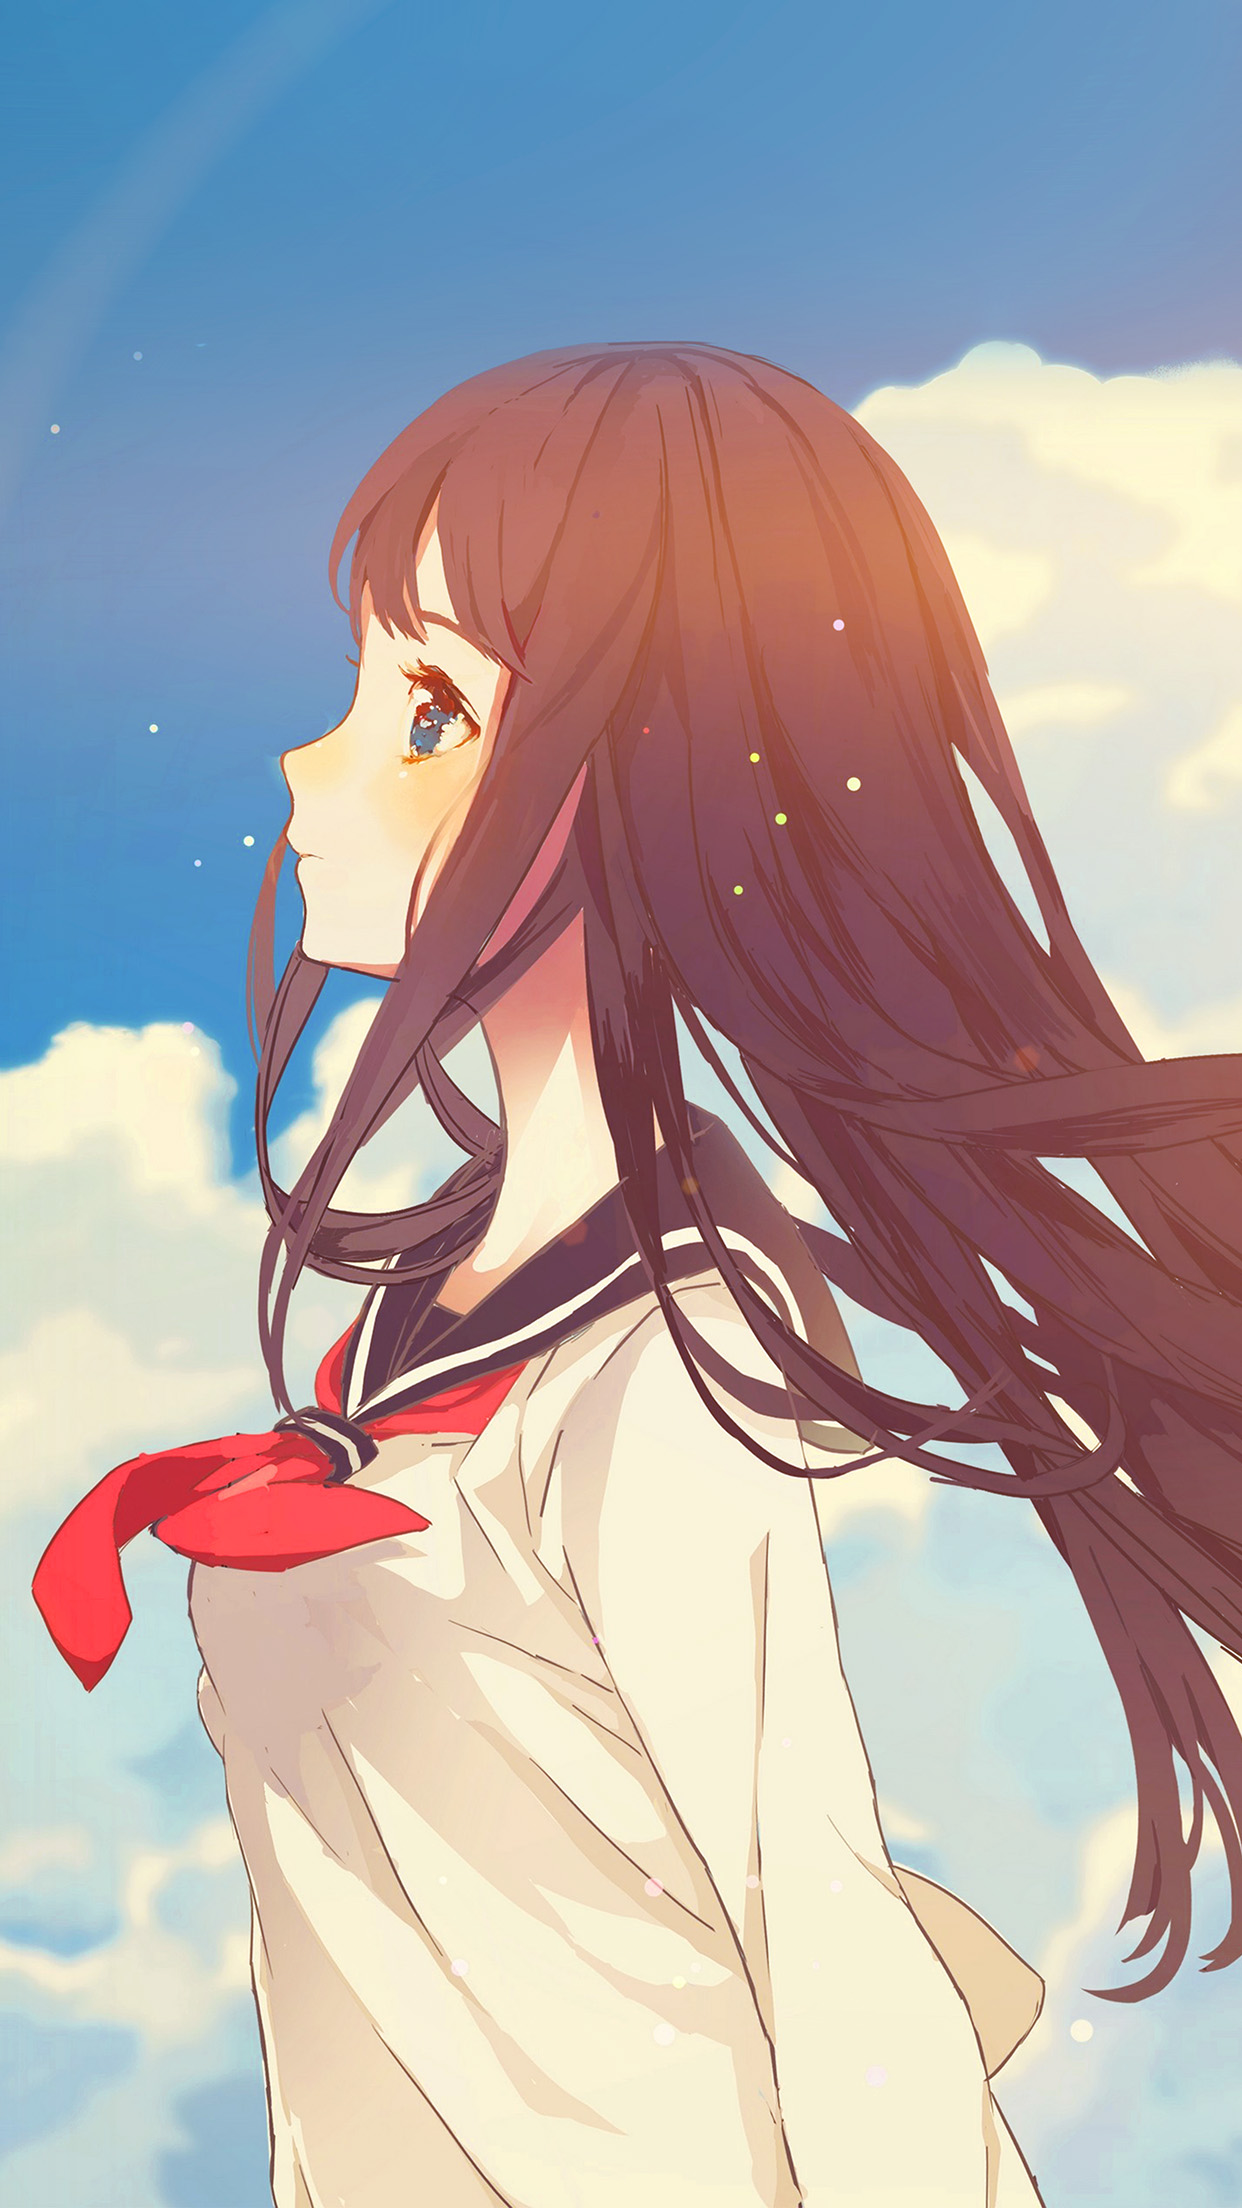 Cute Girl Illustration Anime Sky Flare Android wallpaper